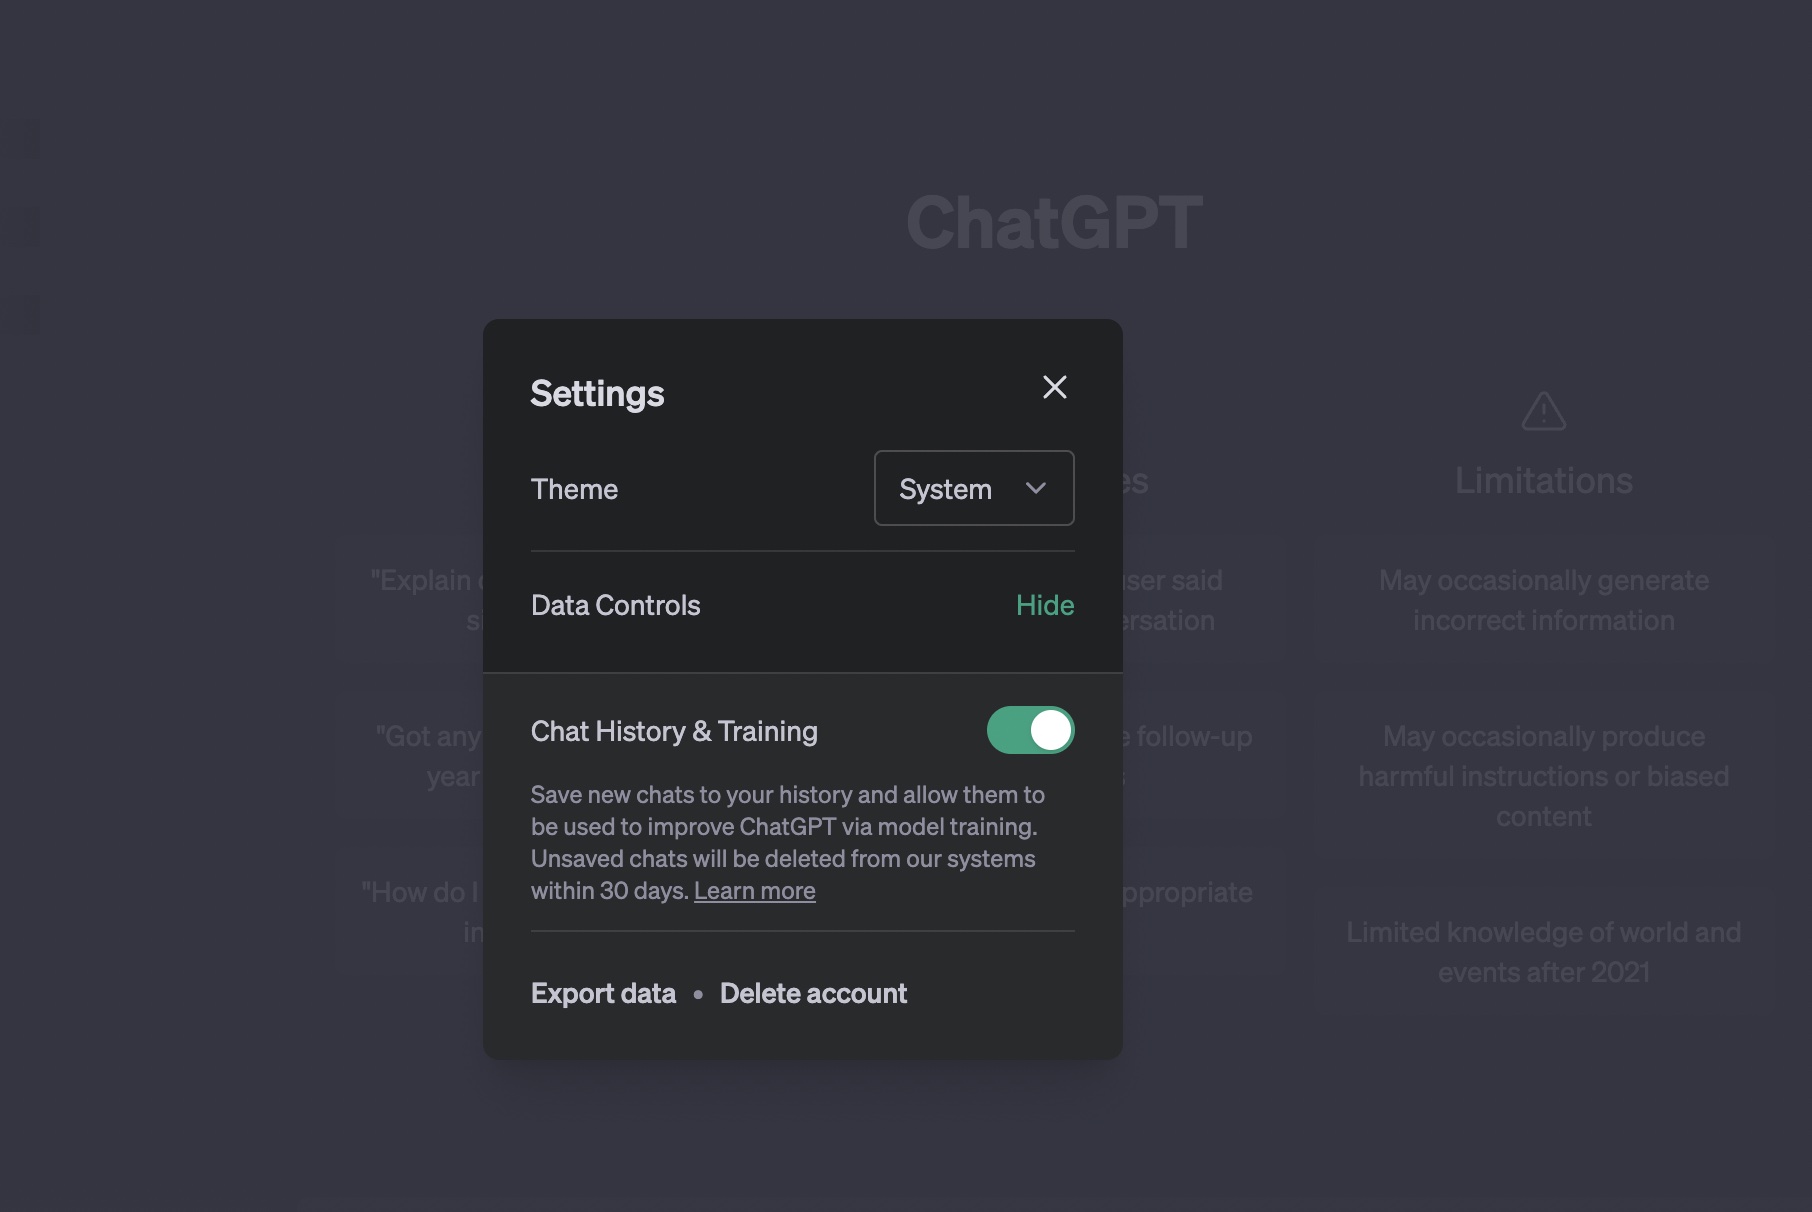 OpenAI added the Chat History & Training setting to ChatGPT in April.